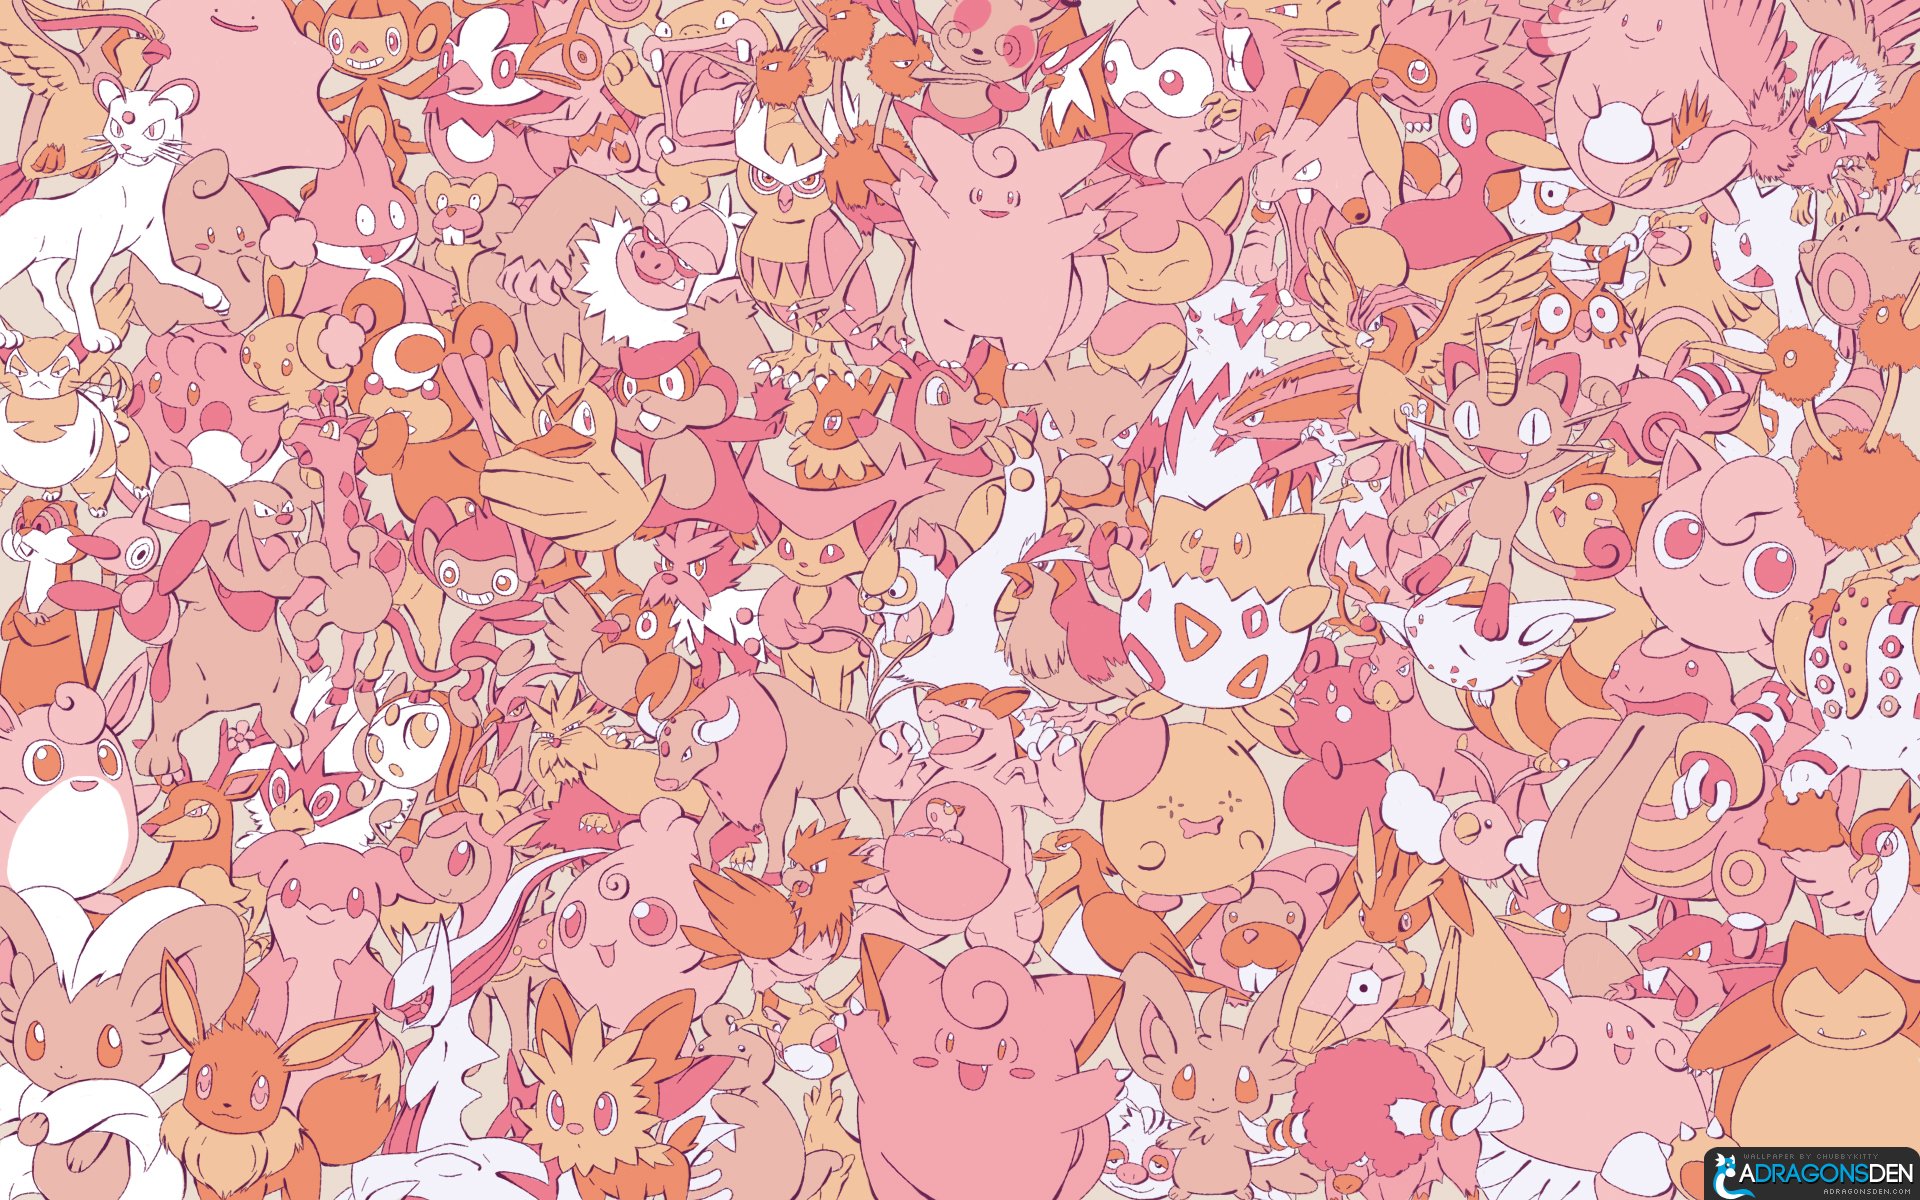 Clefairy pokãmon hd papers and backgrounds